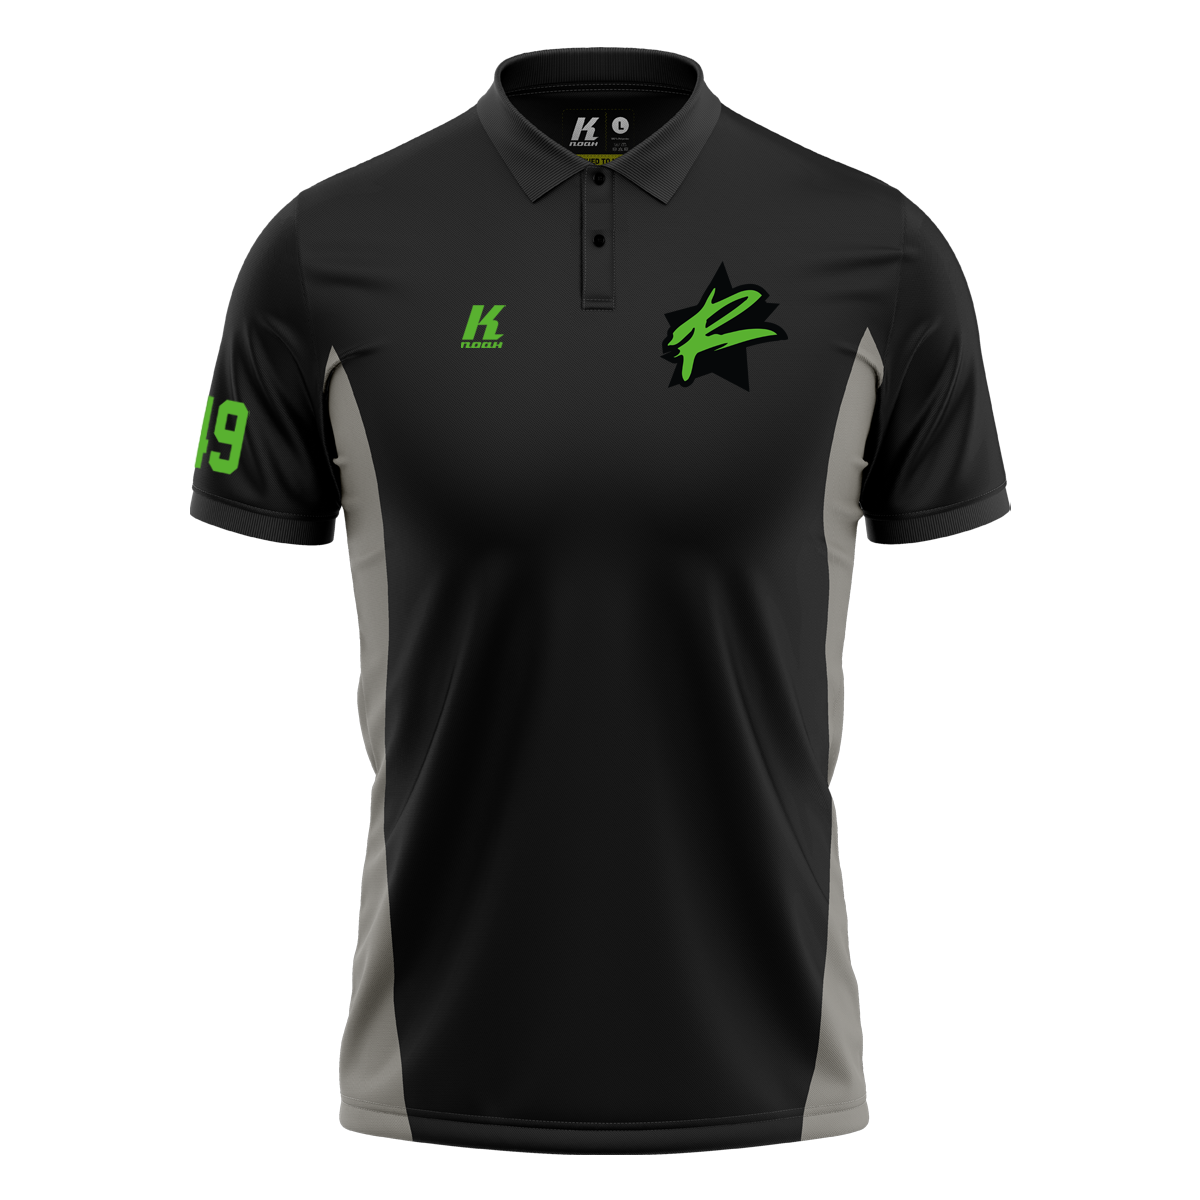 Rebels K.Tech-Fiber Polo “Gameday” with Playernumber/Initials